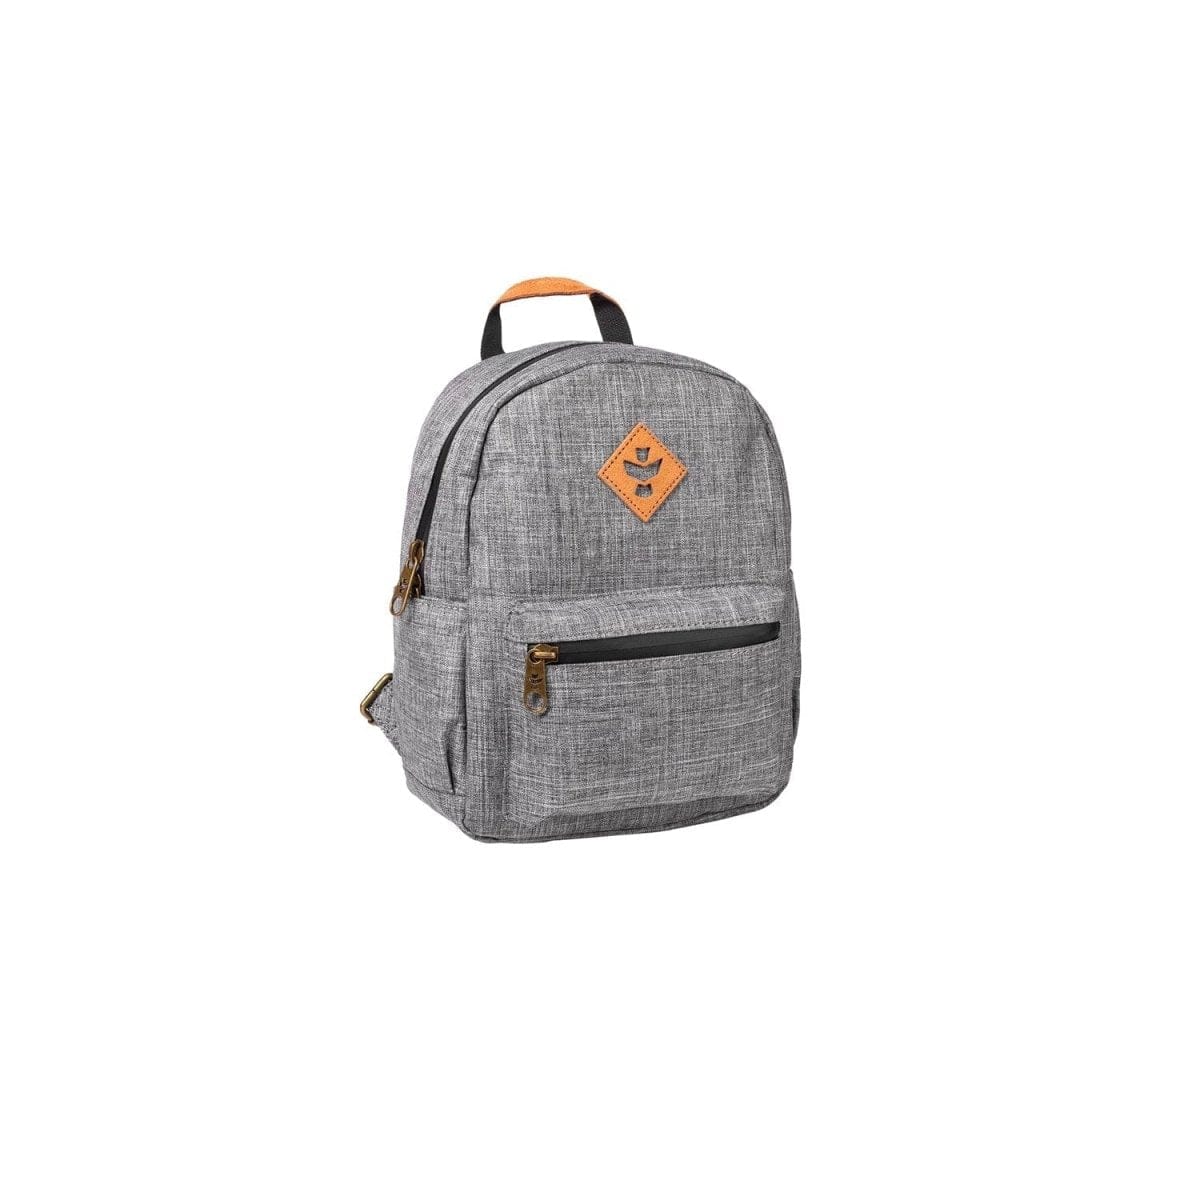 Revelry Supply Travel Bag Crosshatch Grey The Shorty - Smell Proof Mini Backpack